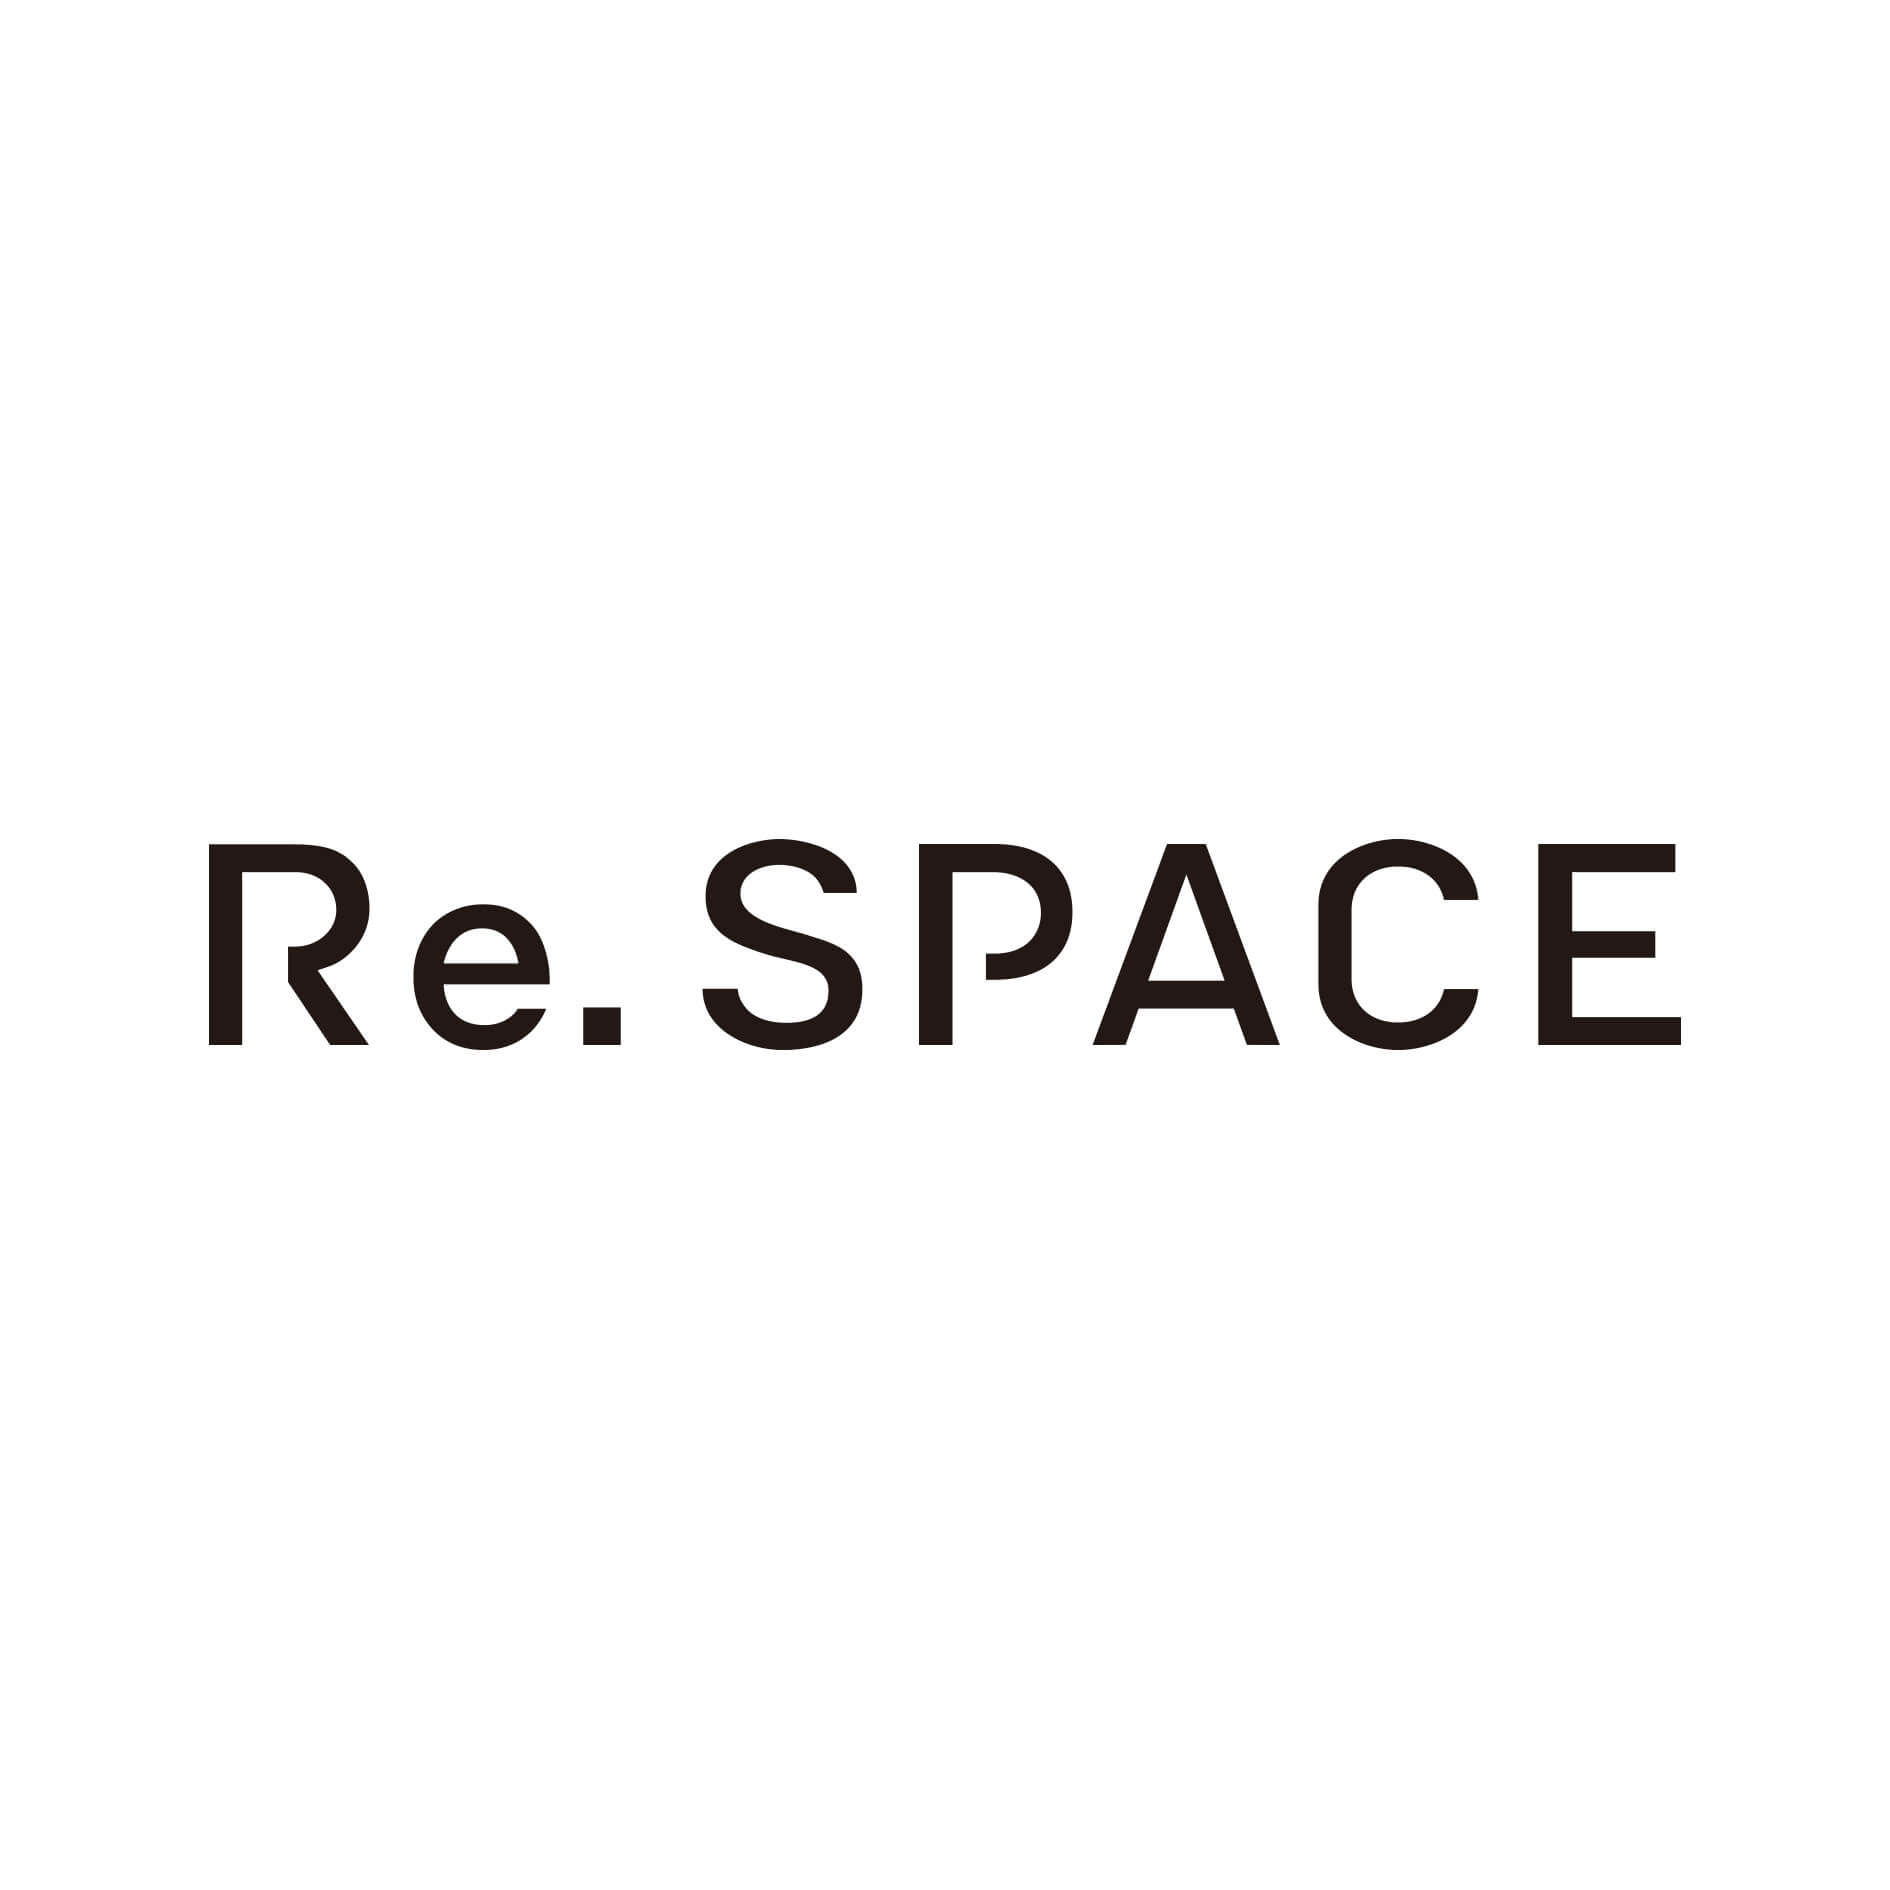 Re. SPACE